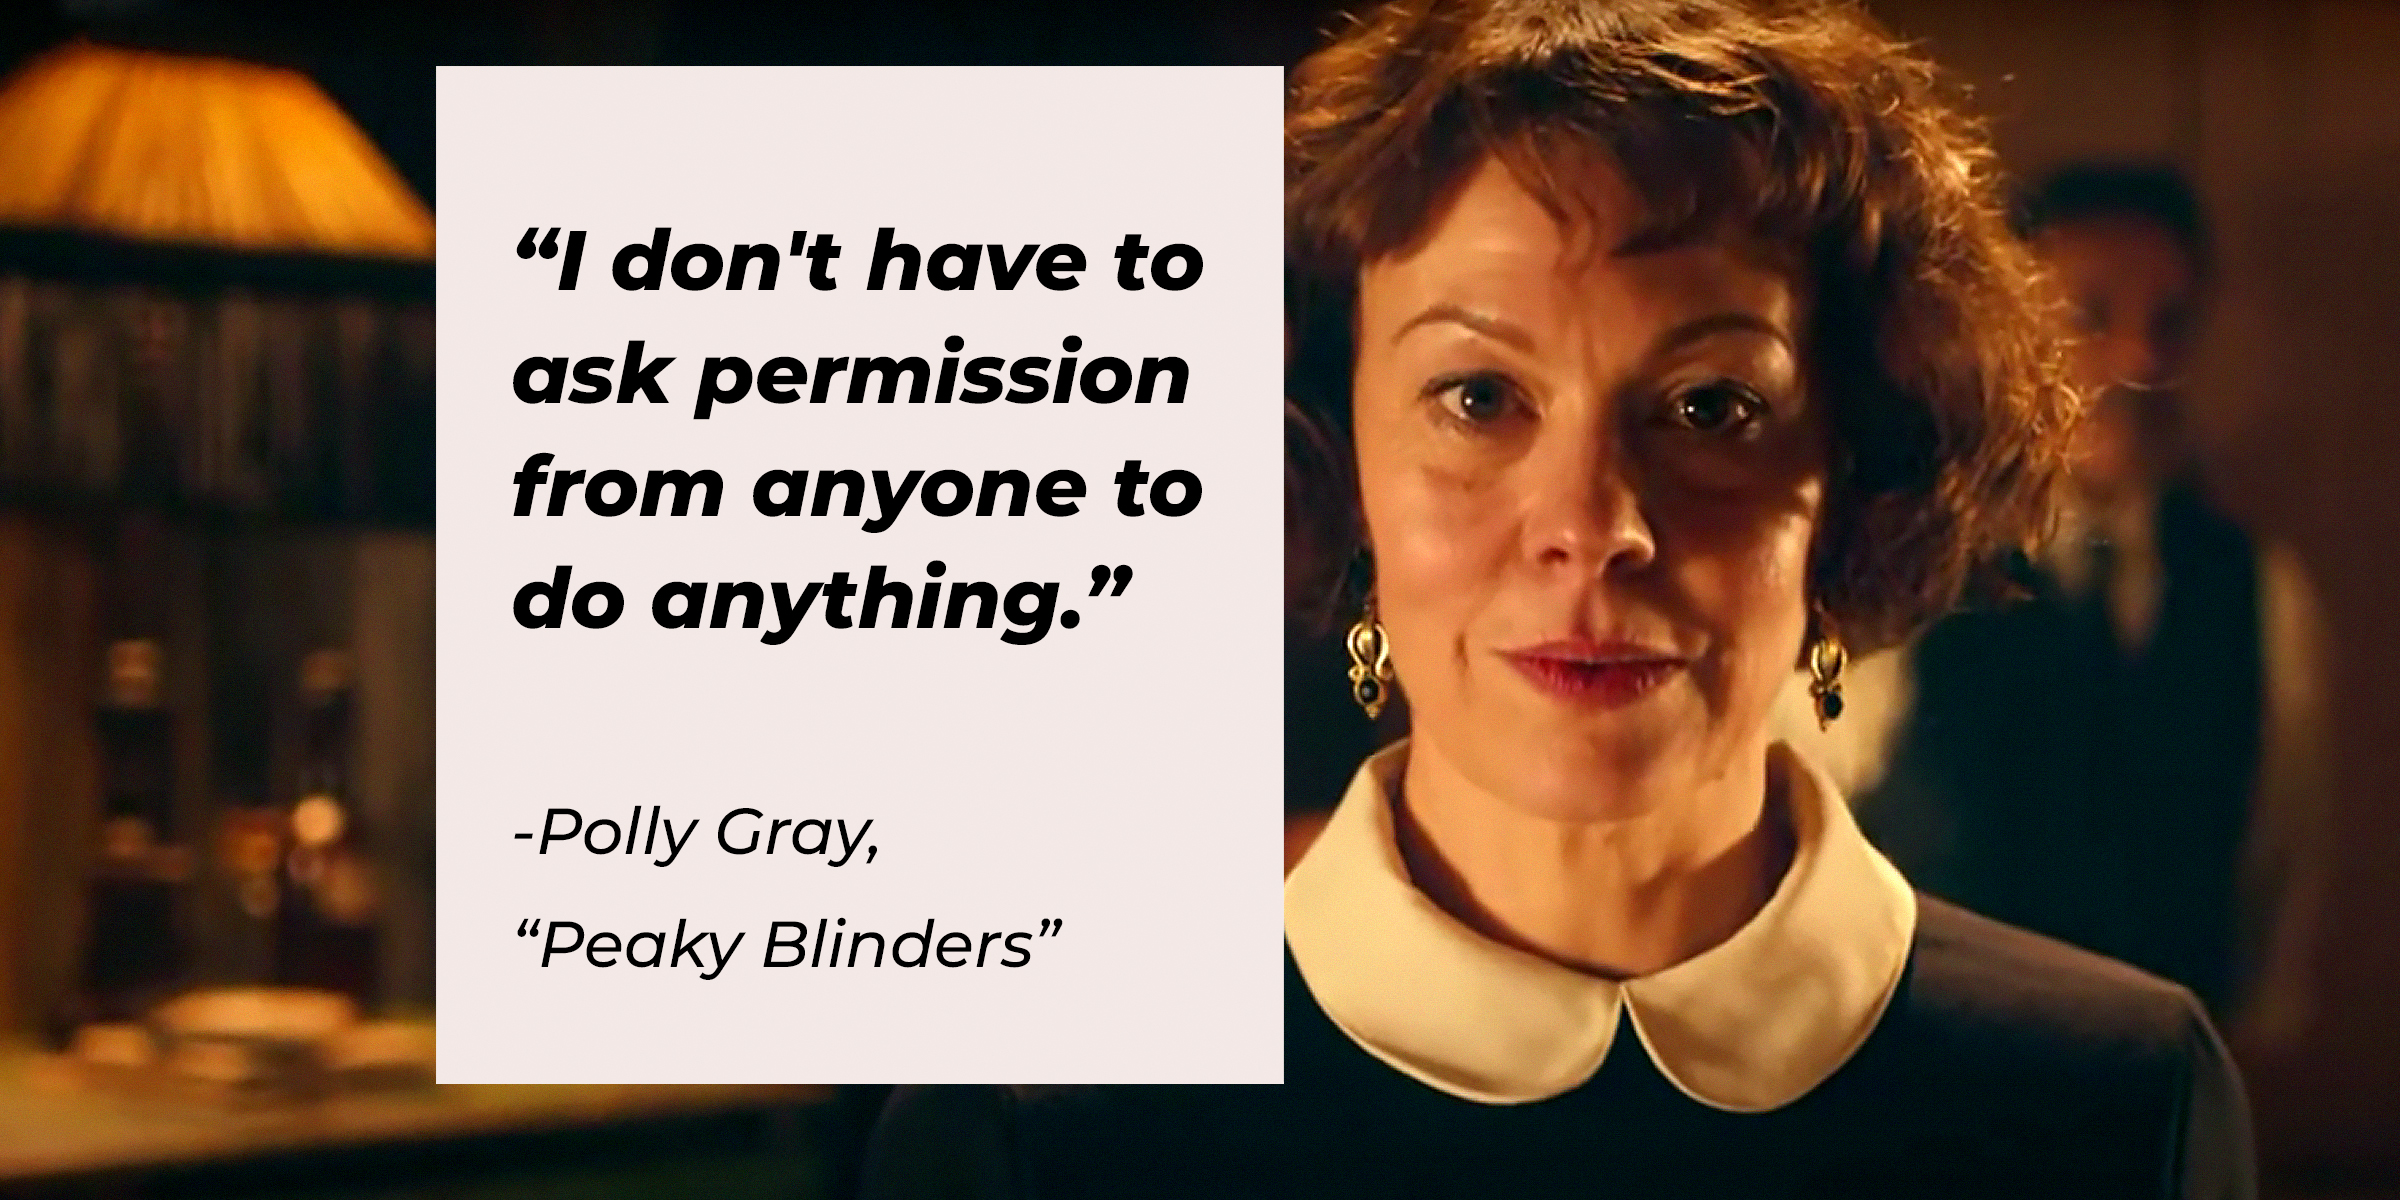 Polly Gray’s image with her quote from “Peaky Blinders”: “I don't have to ask permission from anyone to do anything.” | Source: Youtube.com/BBC